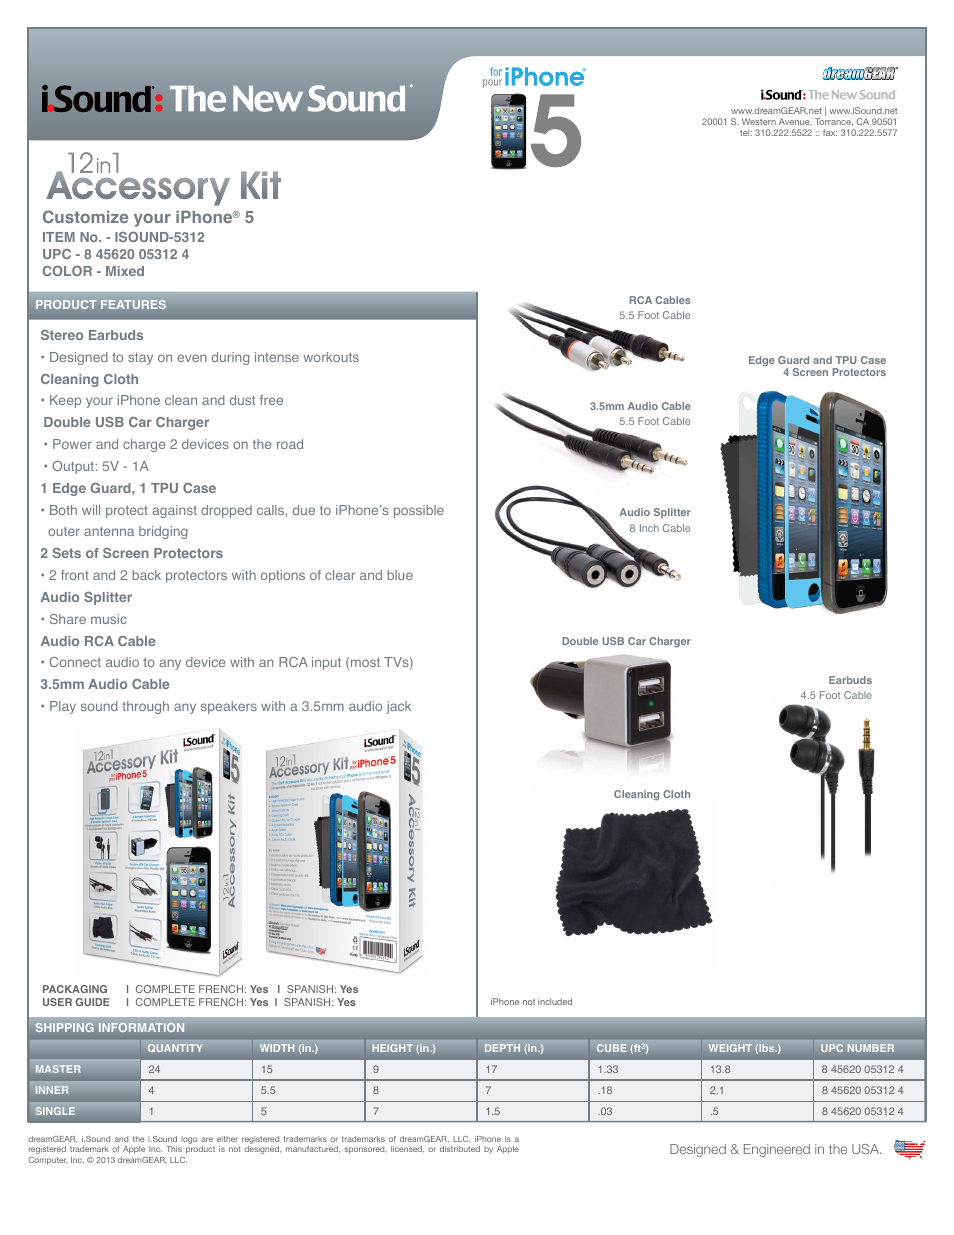 12 in 1 Accessory Kit for iPhone5-5s - Sell Sheet